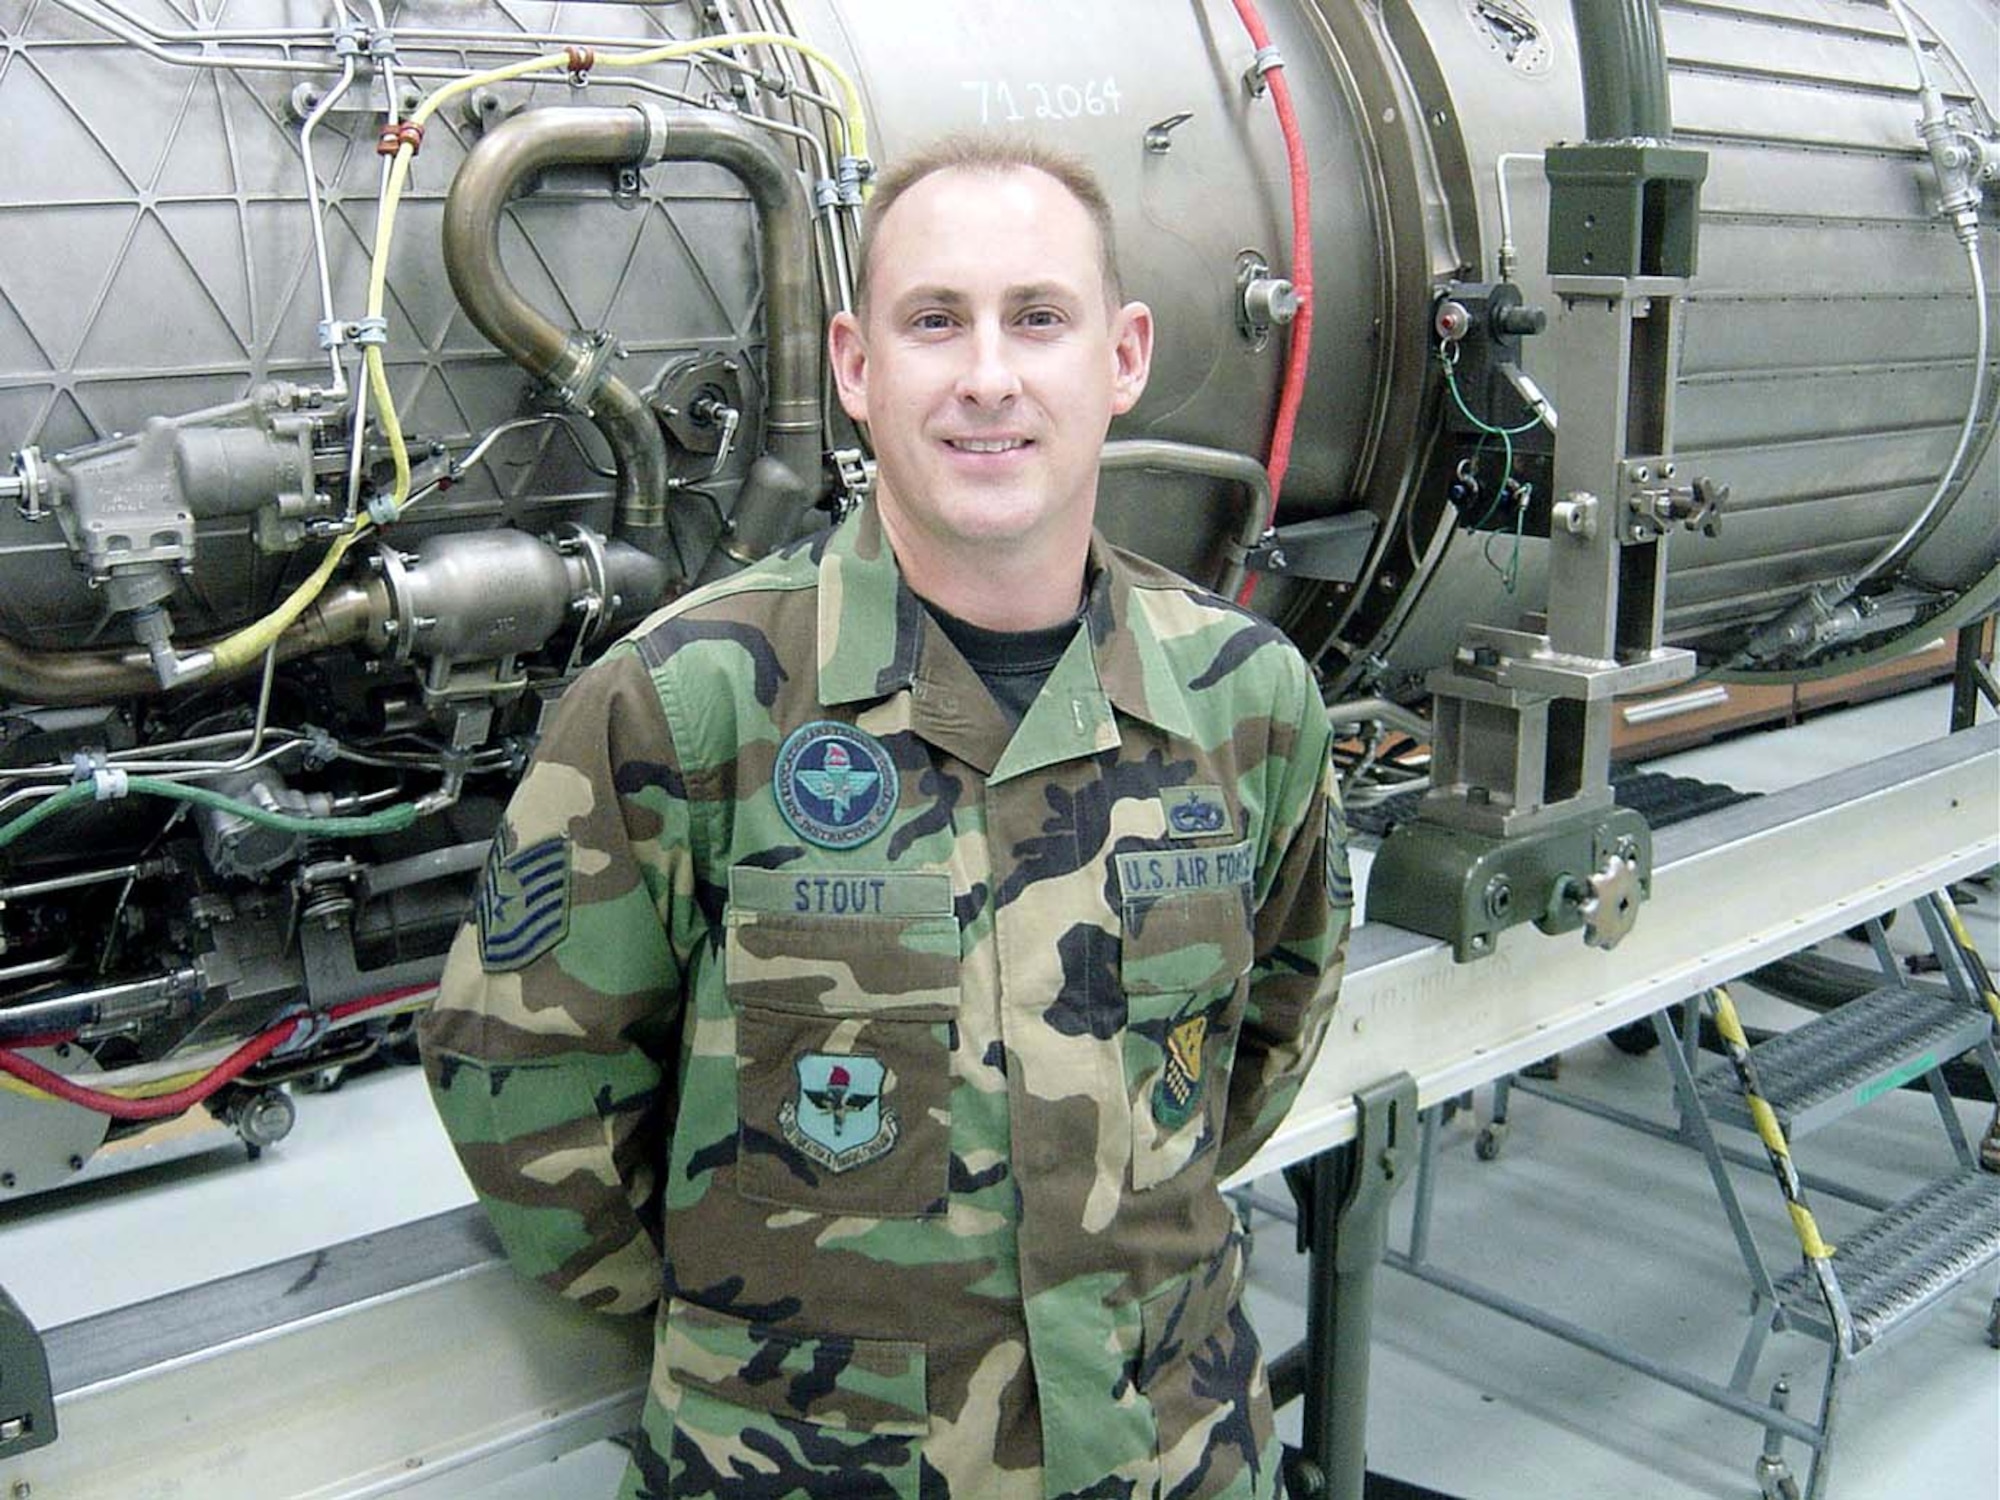 LUKE AIR FORCE BASE, Ariz. -- Tech. Sgt. Scott Stout joined the Air Force to gain the professionalism he saw in his father and said today he wants to share his dedication to service with everyone he meets.  He is an F-15 Eagle maintenance trainer here.  (Courtesy photo)